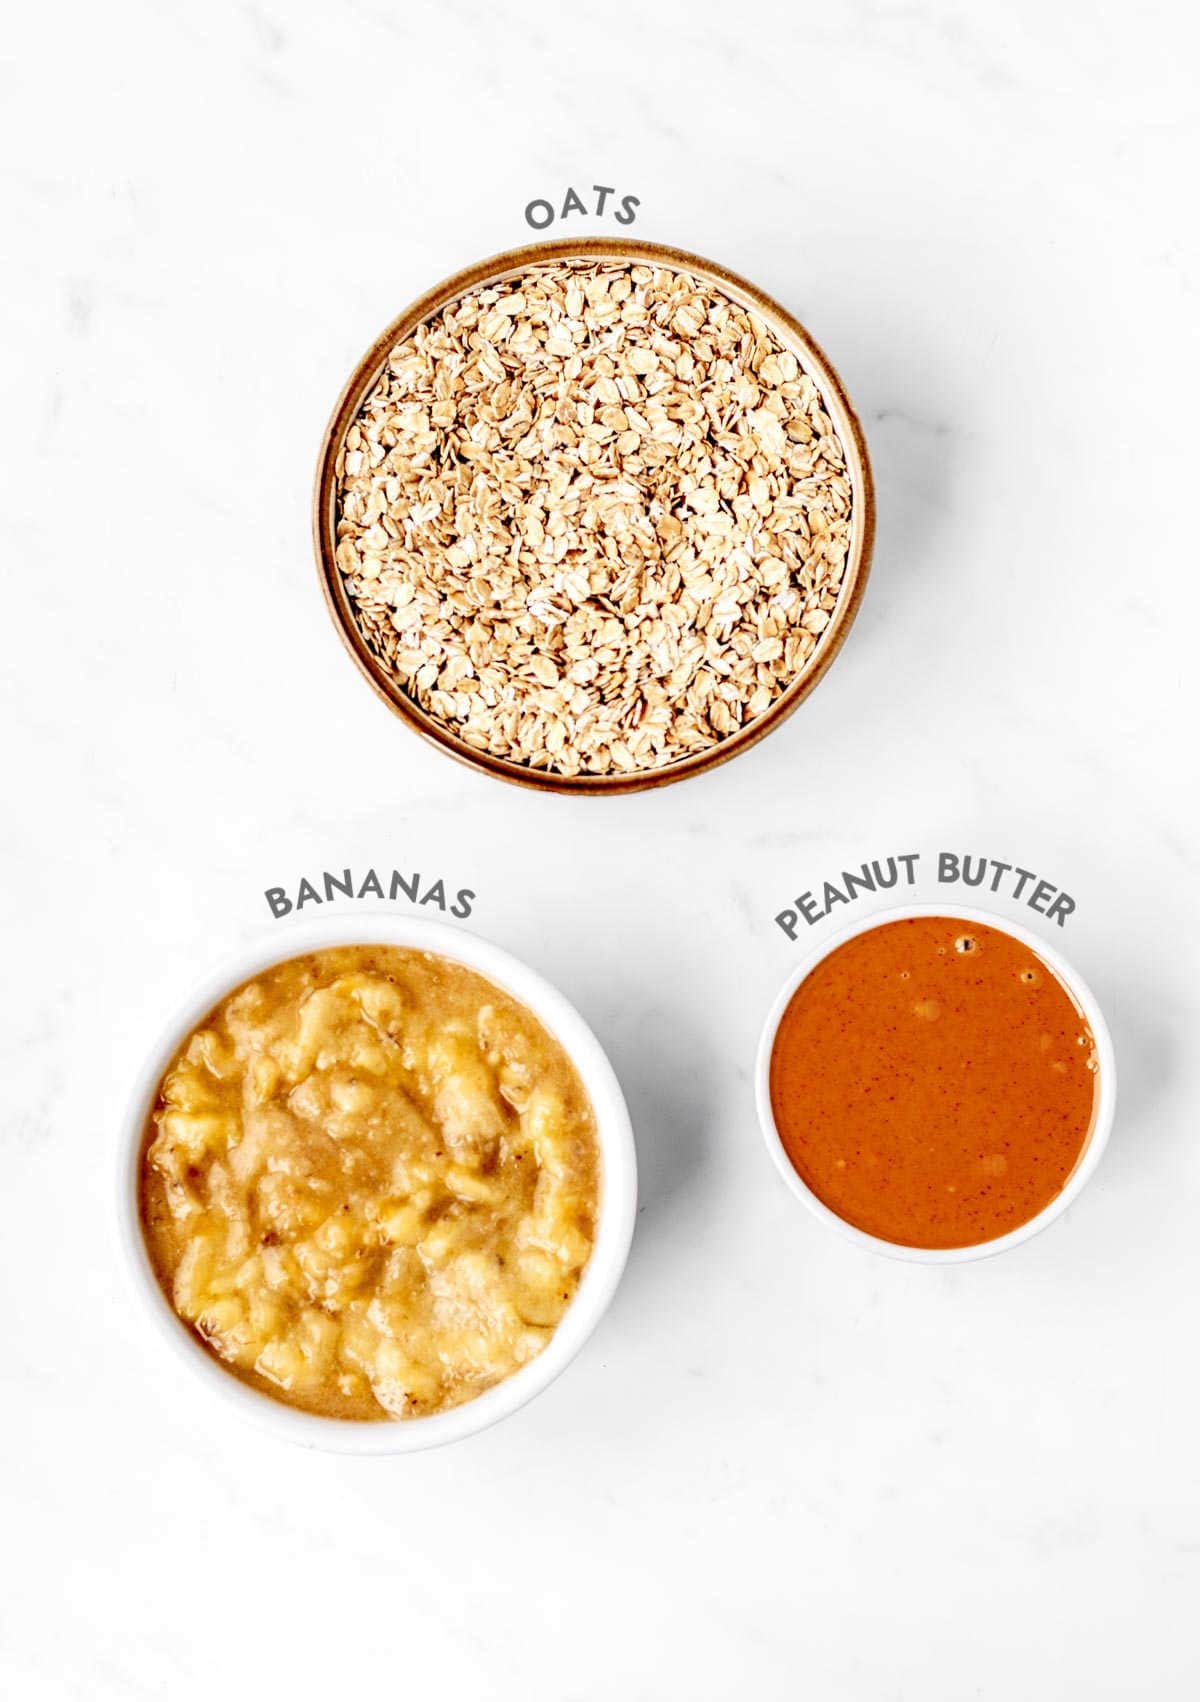 Labelled ingredients required for 3 ingredient banana oatmeal muffins recipe.